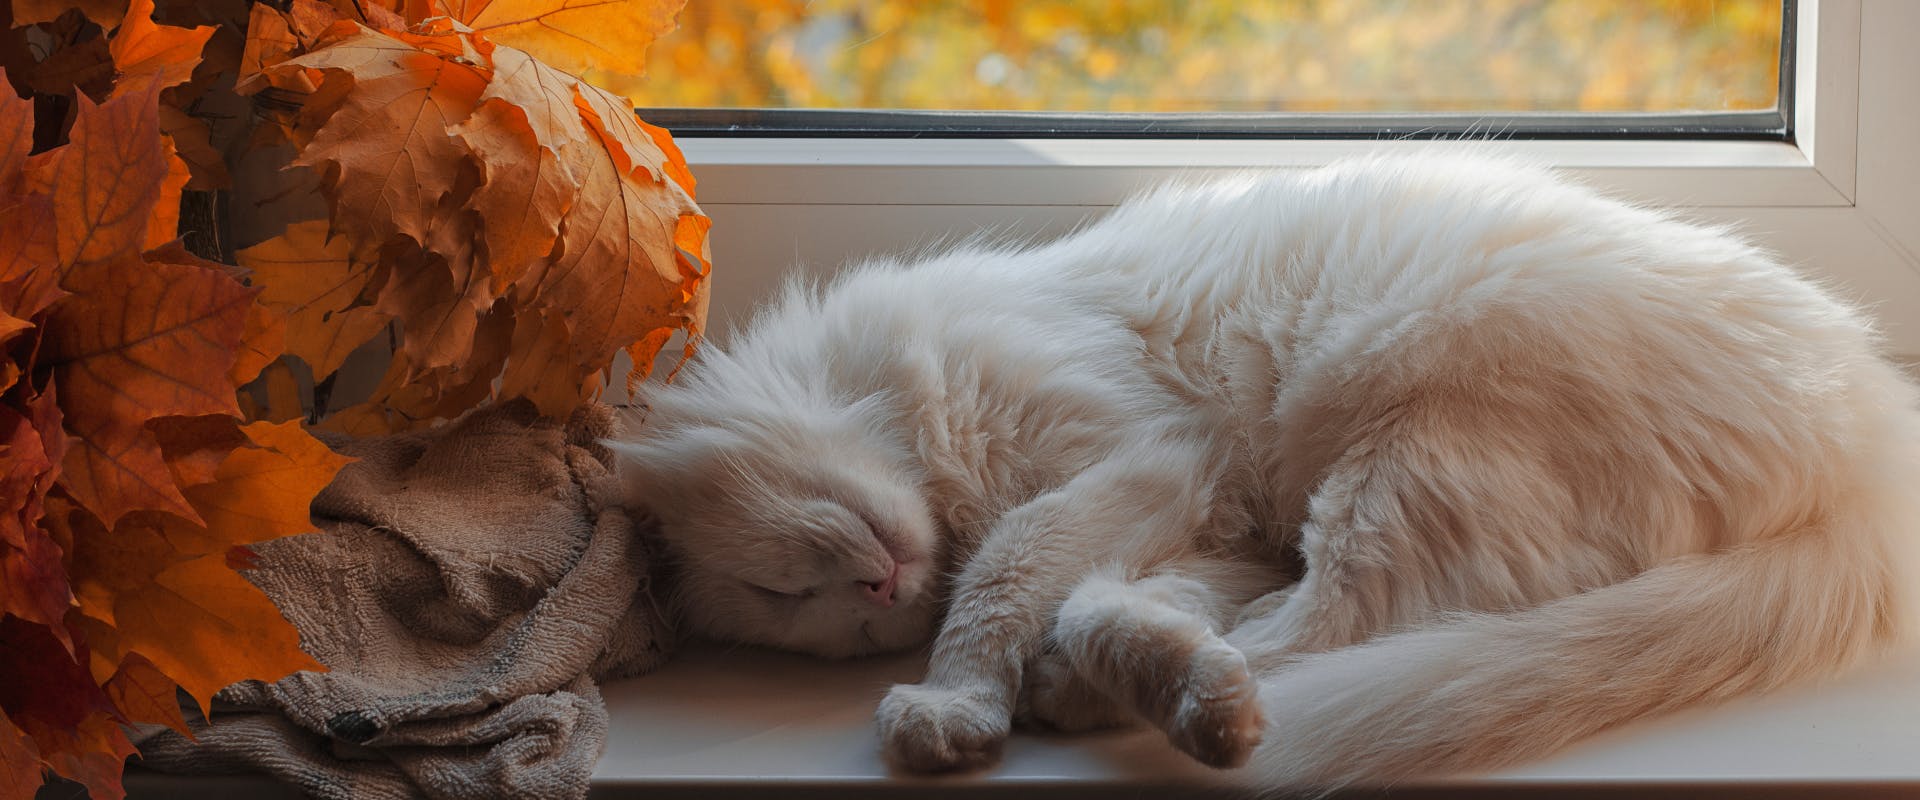 white long haired cat sleeping in a windowsill next to a pile of fall leaves